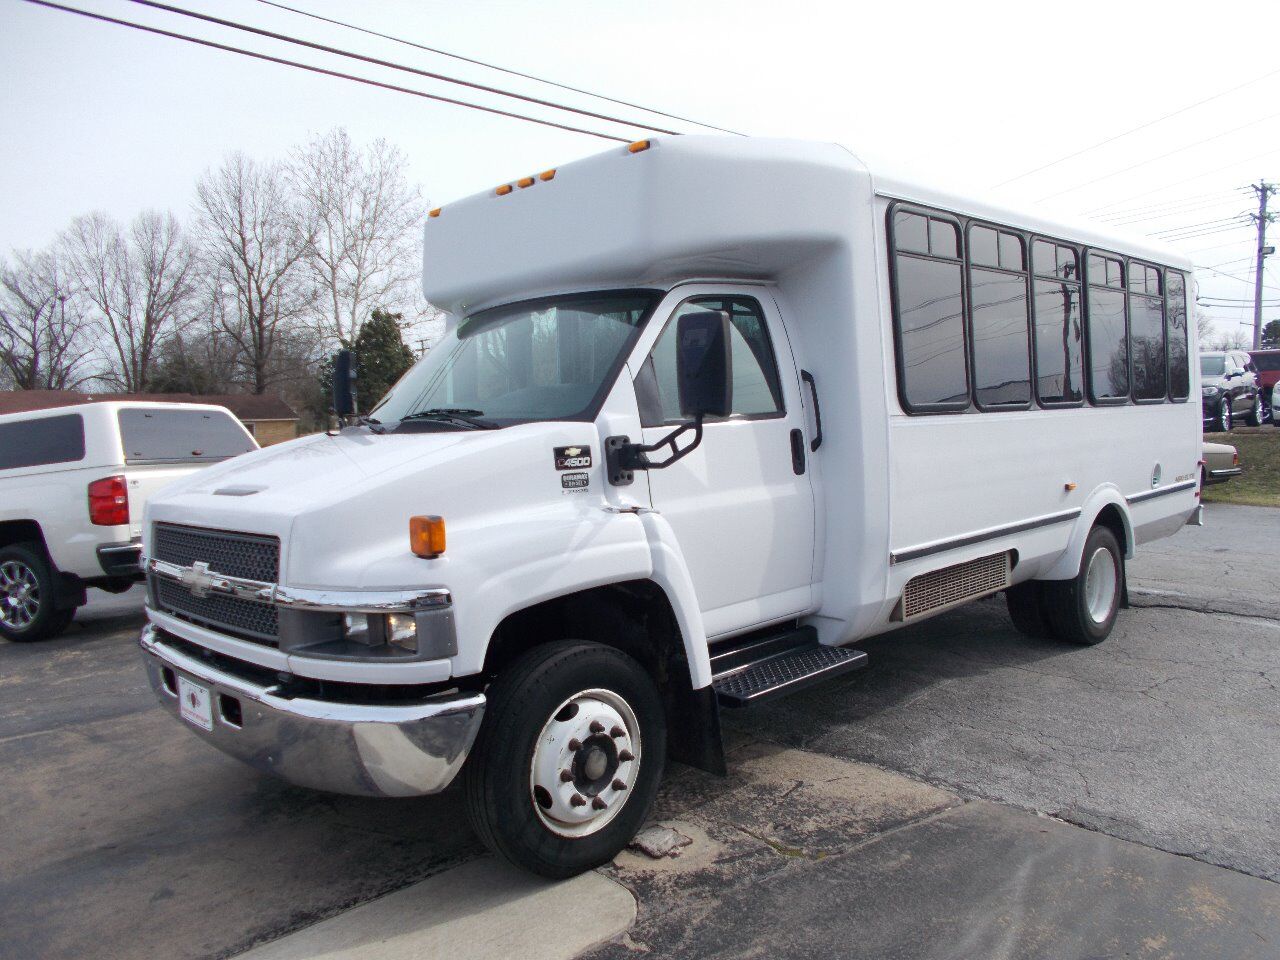 2009-chevrolet-c4500-4x2-2dr-chassis-166-259-in-wb